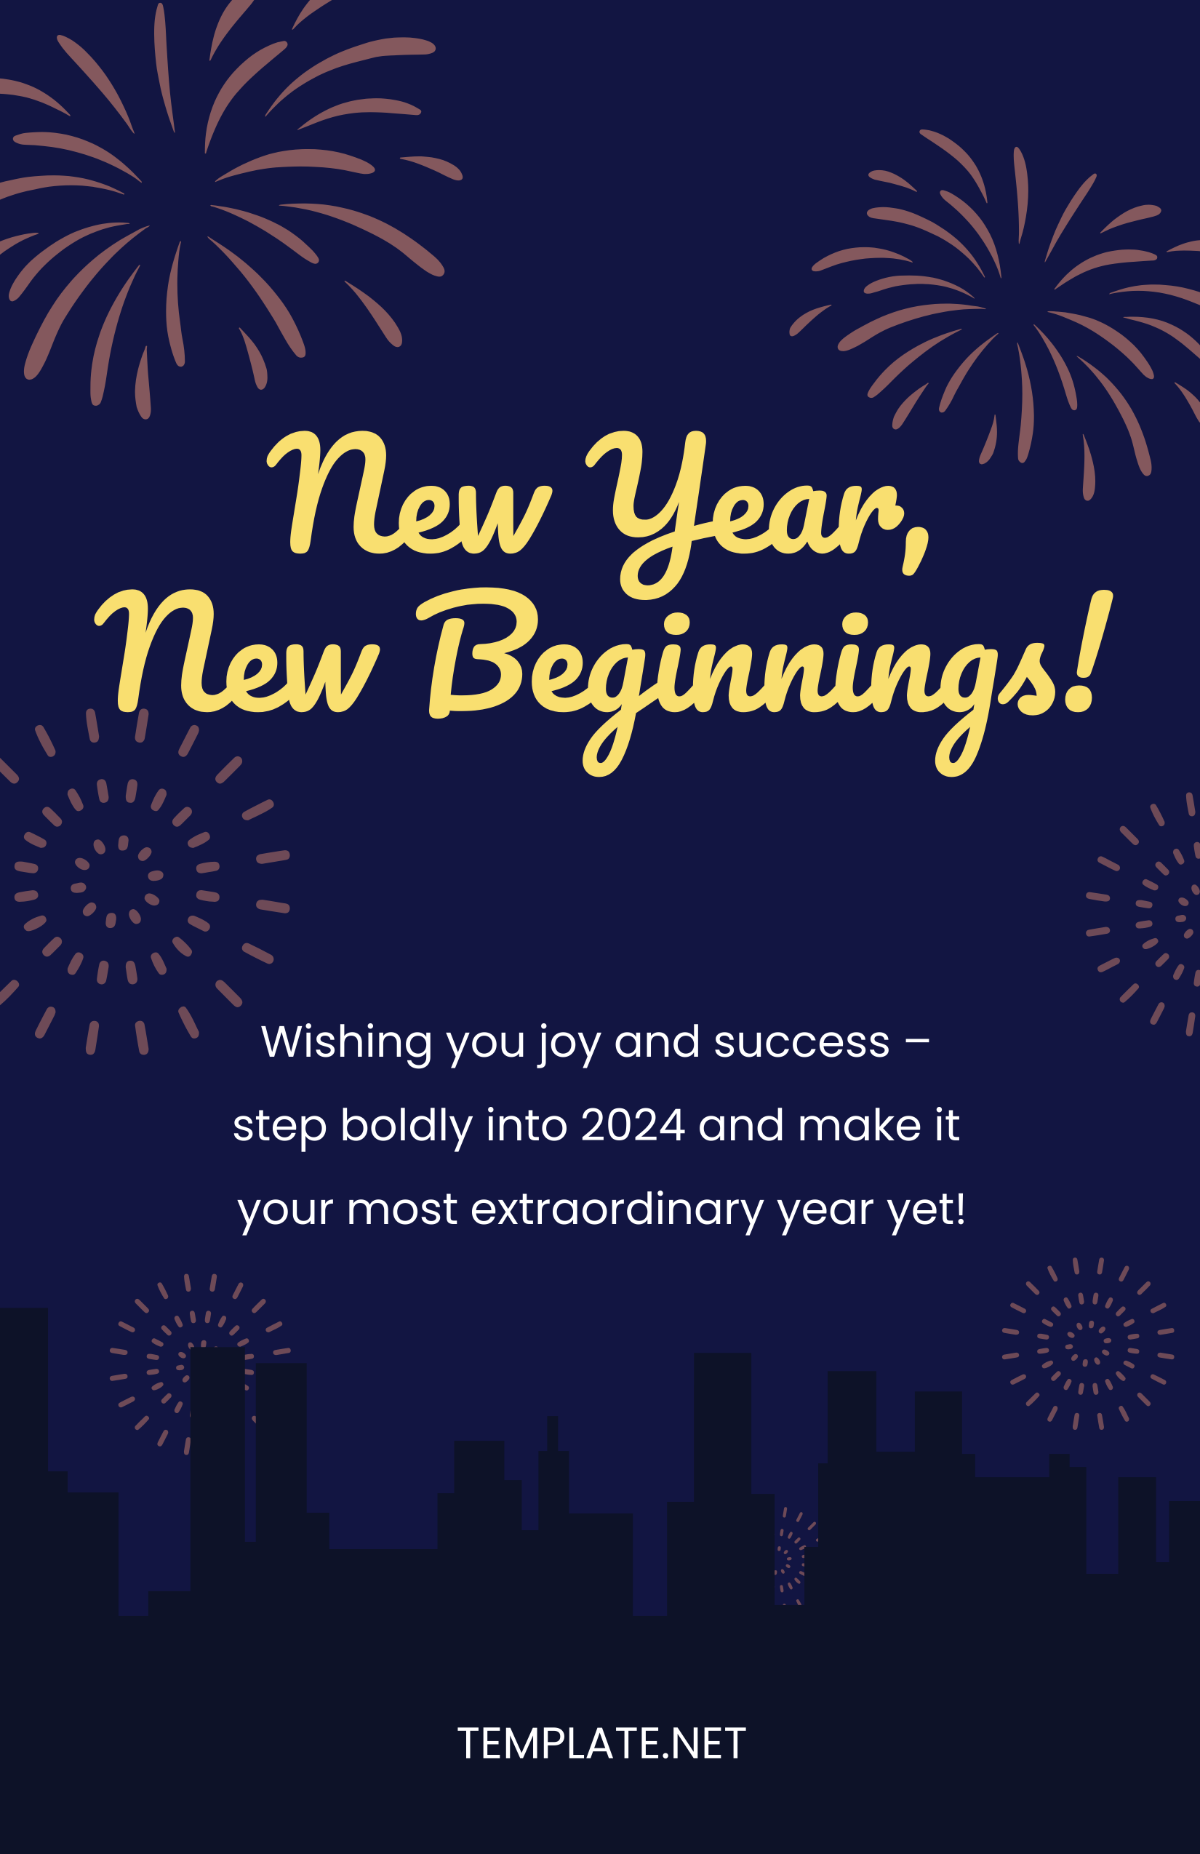 Free New Year Greetings Poster Template